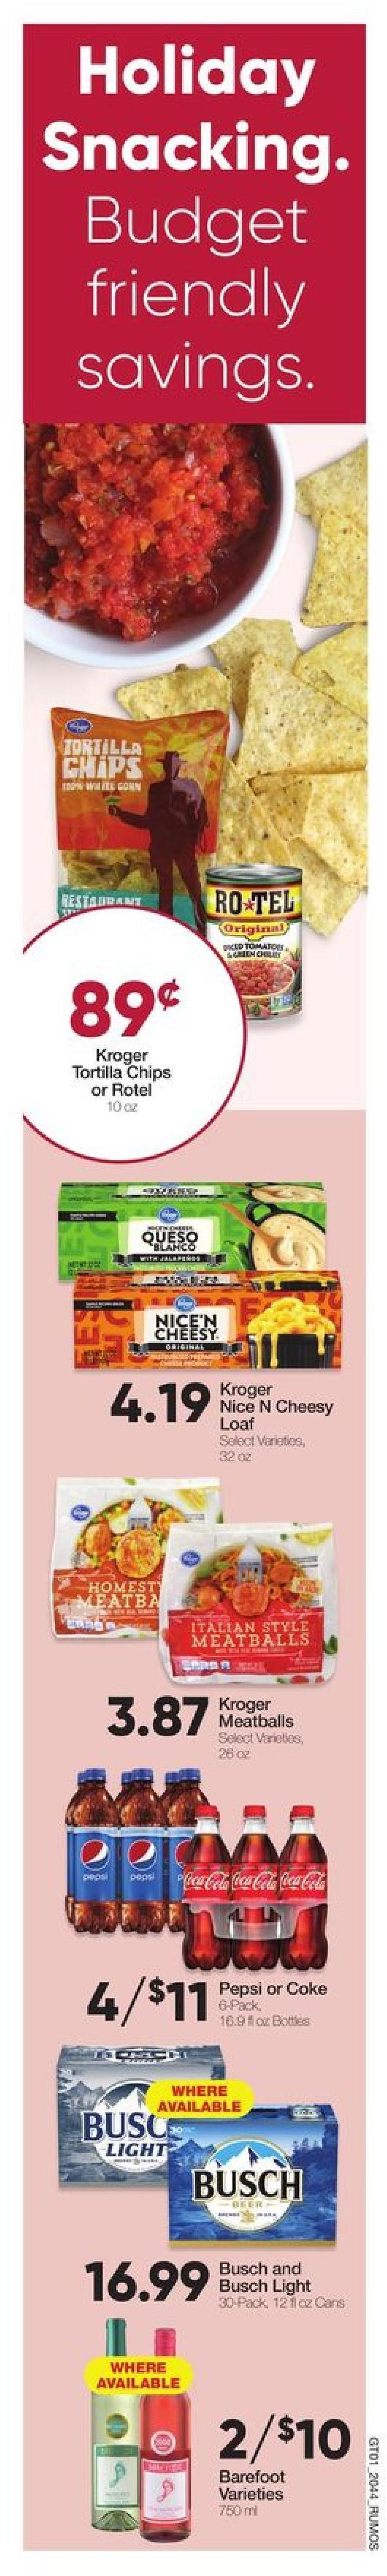 Ruler Foods Weekly Ad from December 2